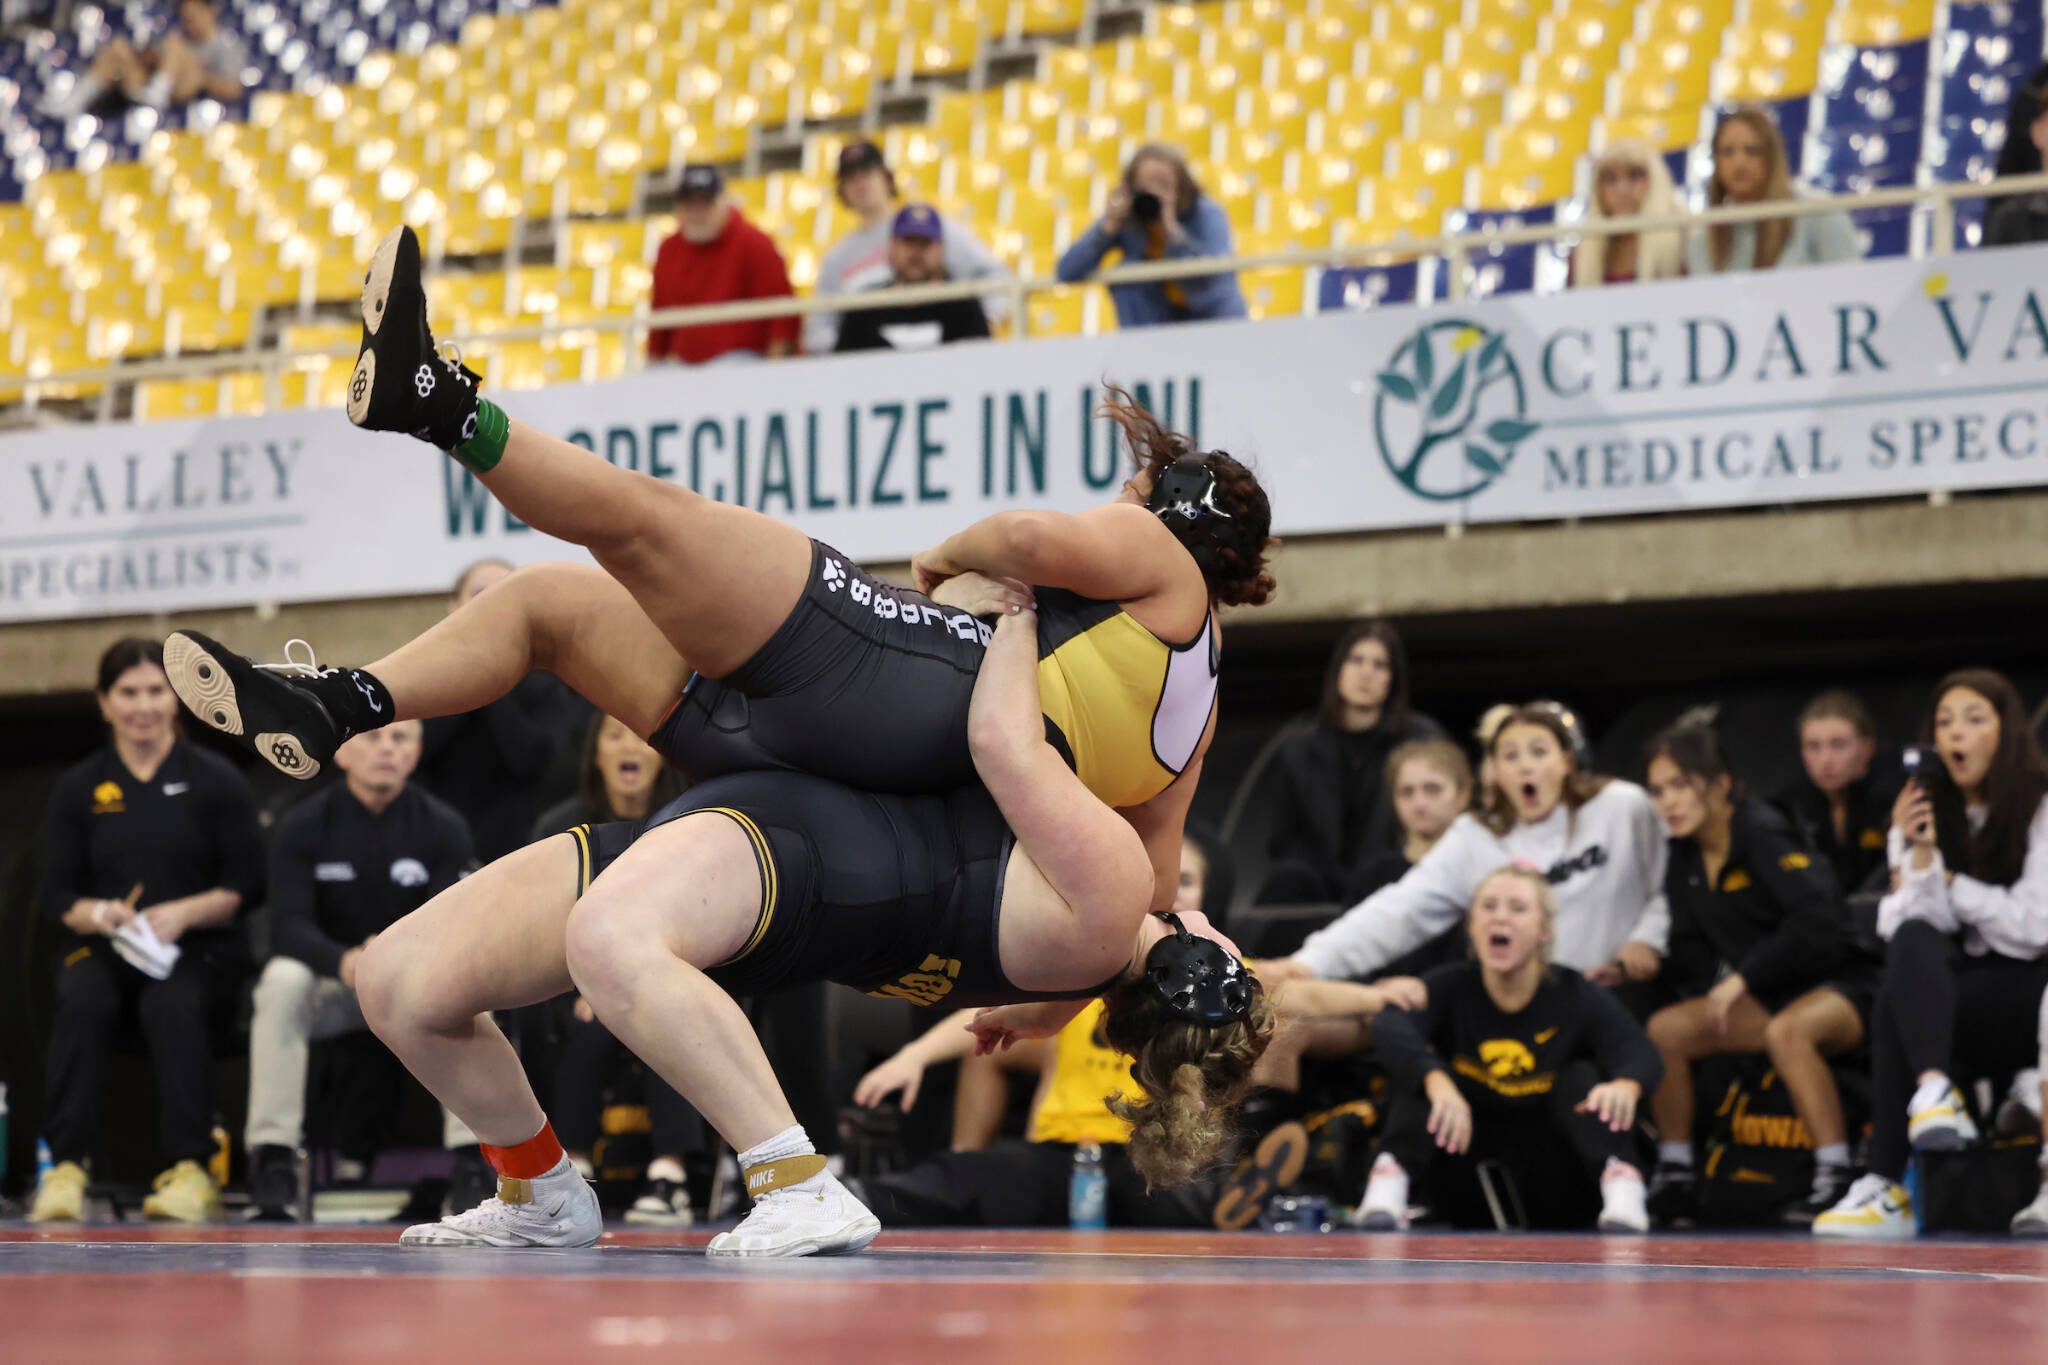 Iowa Hawkeyes’ Alivia White, a Marysville Pilchuck High School graduate, executes a rare five-point throw that went viral during the NWCA National Dual Meet Championships on Jan. 5 at the UNI-Dome in Cedar Falls, Iowa. (Jerod Ringwald/hawkeyesports.com)